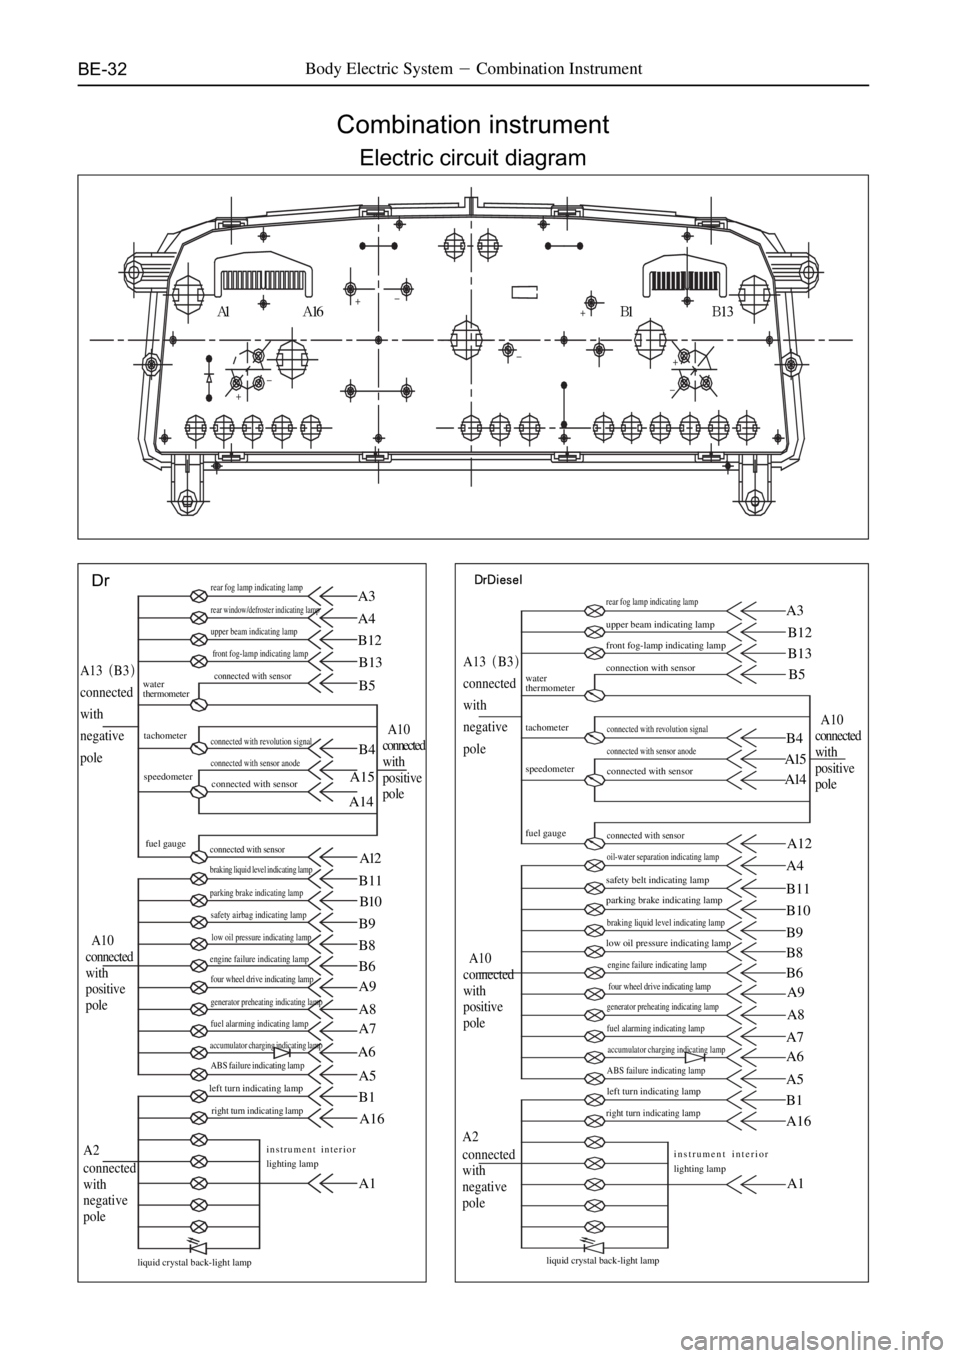 GREAT WALL PEGASUS 2006  Service Manual BE-32Body Electric SystemCombination Instrument
Combination instrument
Electric circuit diagram
�
� �� �
�
�
�
^N ^NS _N _ N P
DraêaáÉëÉärear fog lamp indicating lamp
rear window/defros